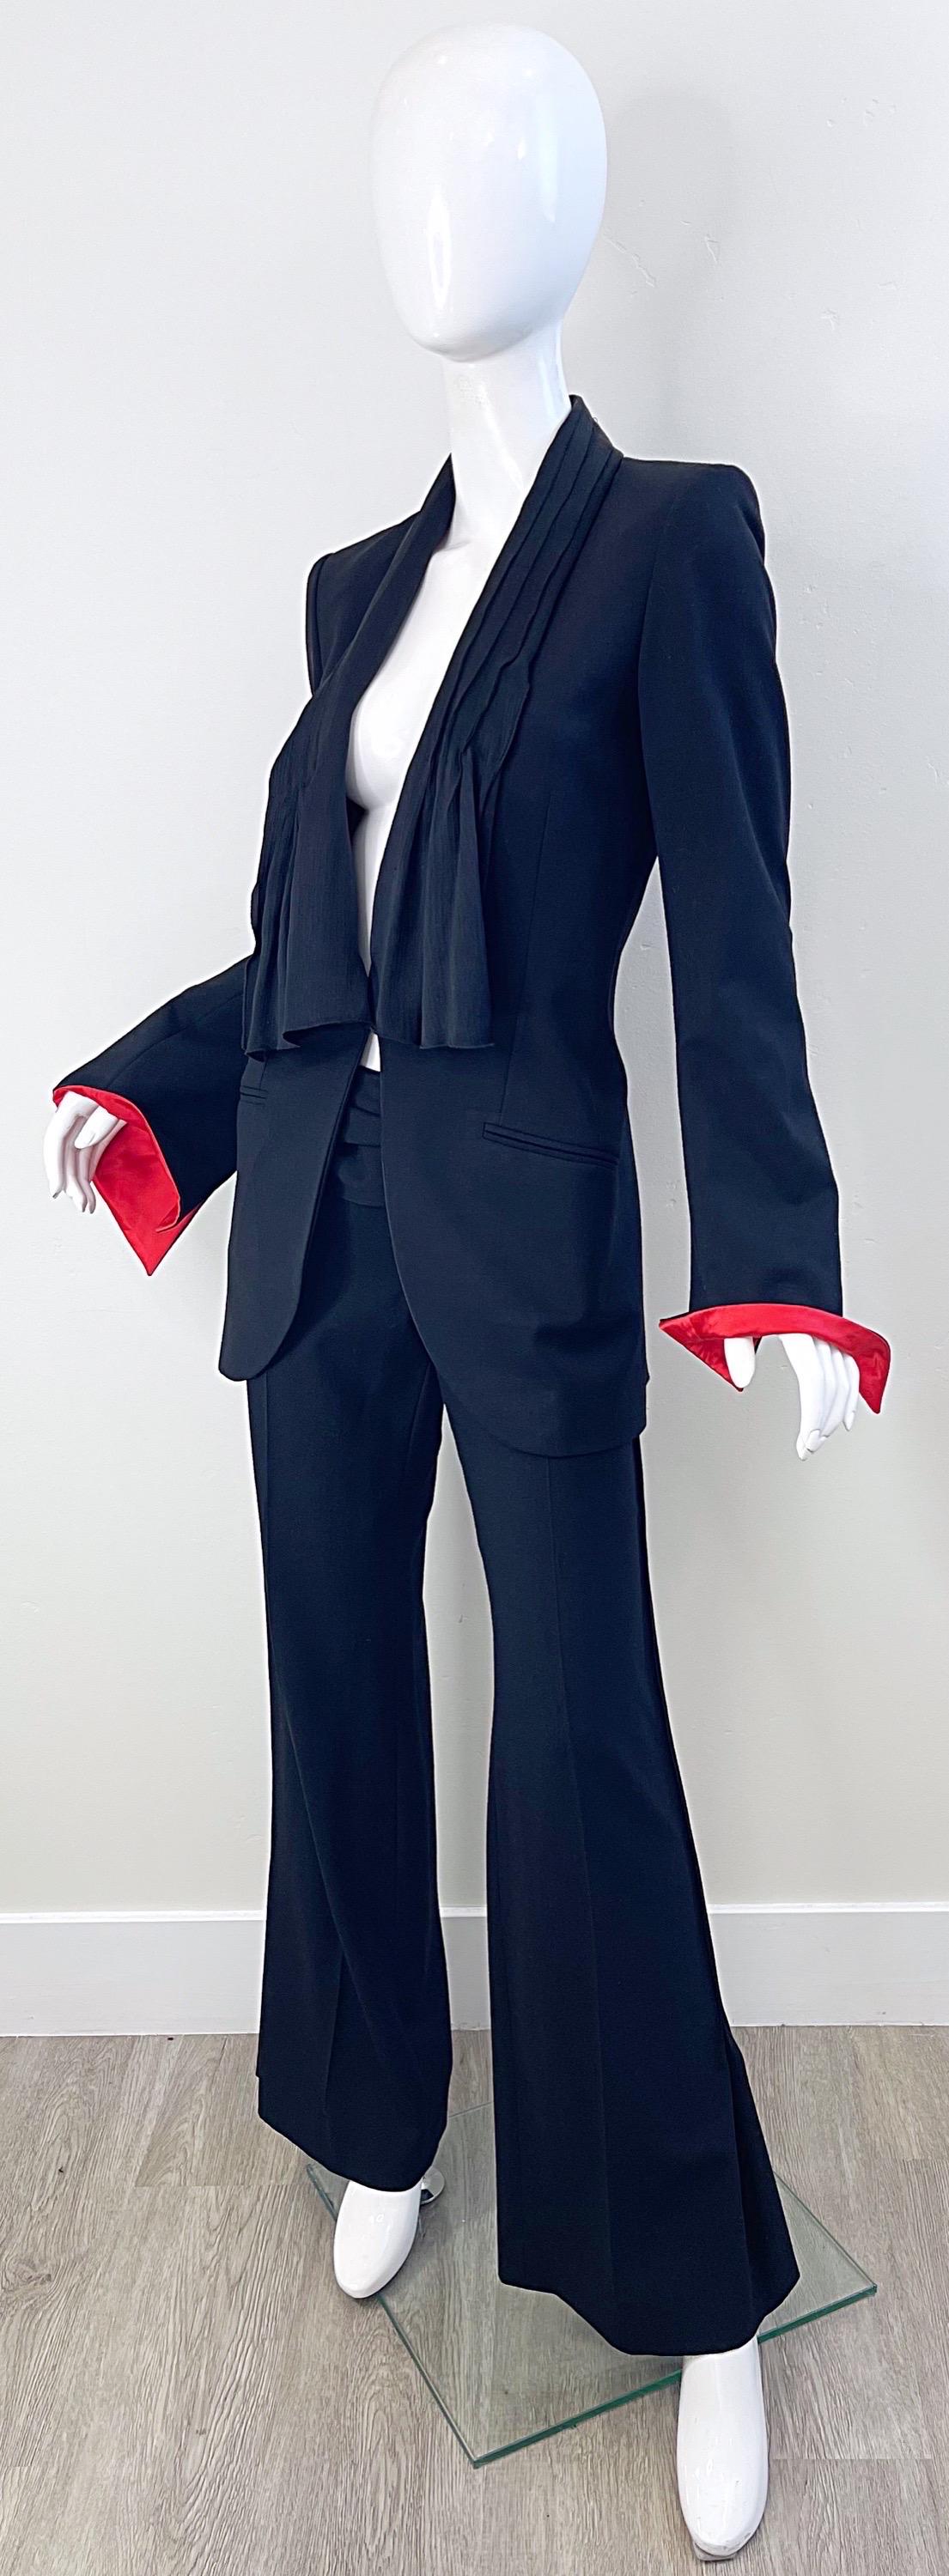 Lloyd Klein 2000s Black and Red Size 8 / 40 Wide Flare Leg Y2K Jacket Pant Suit  For Sale 8